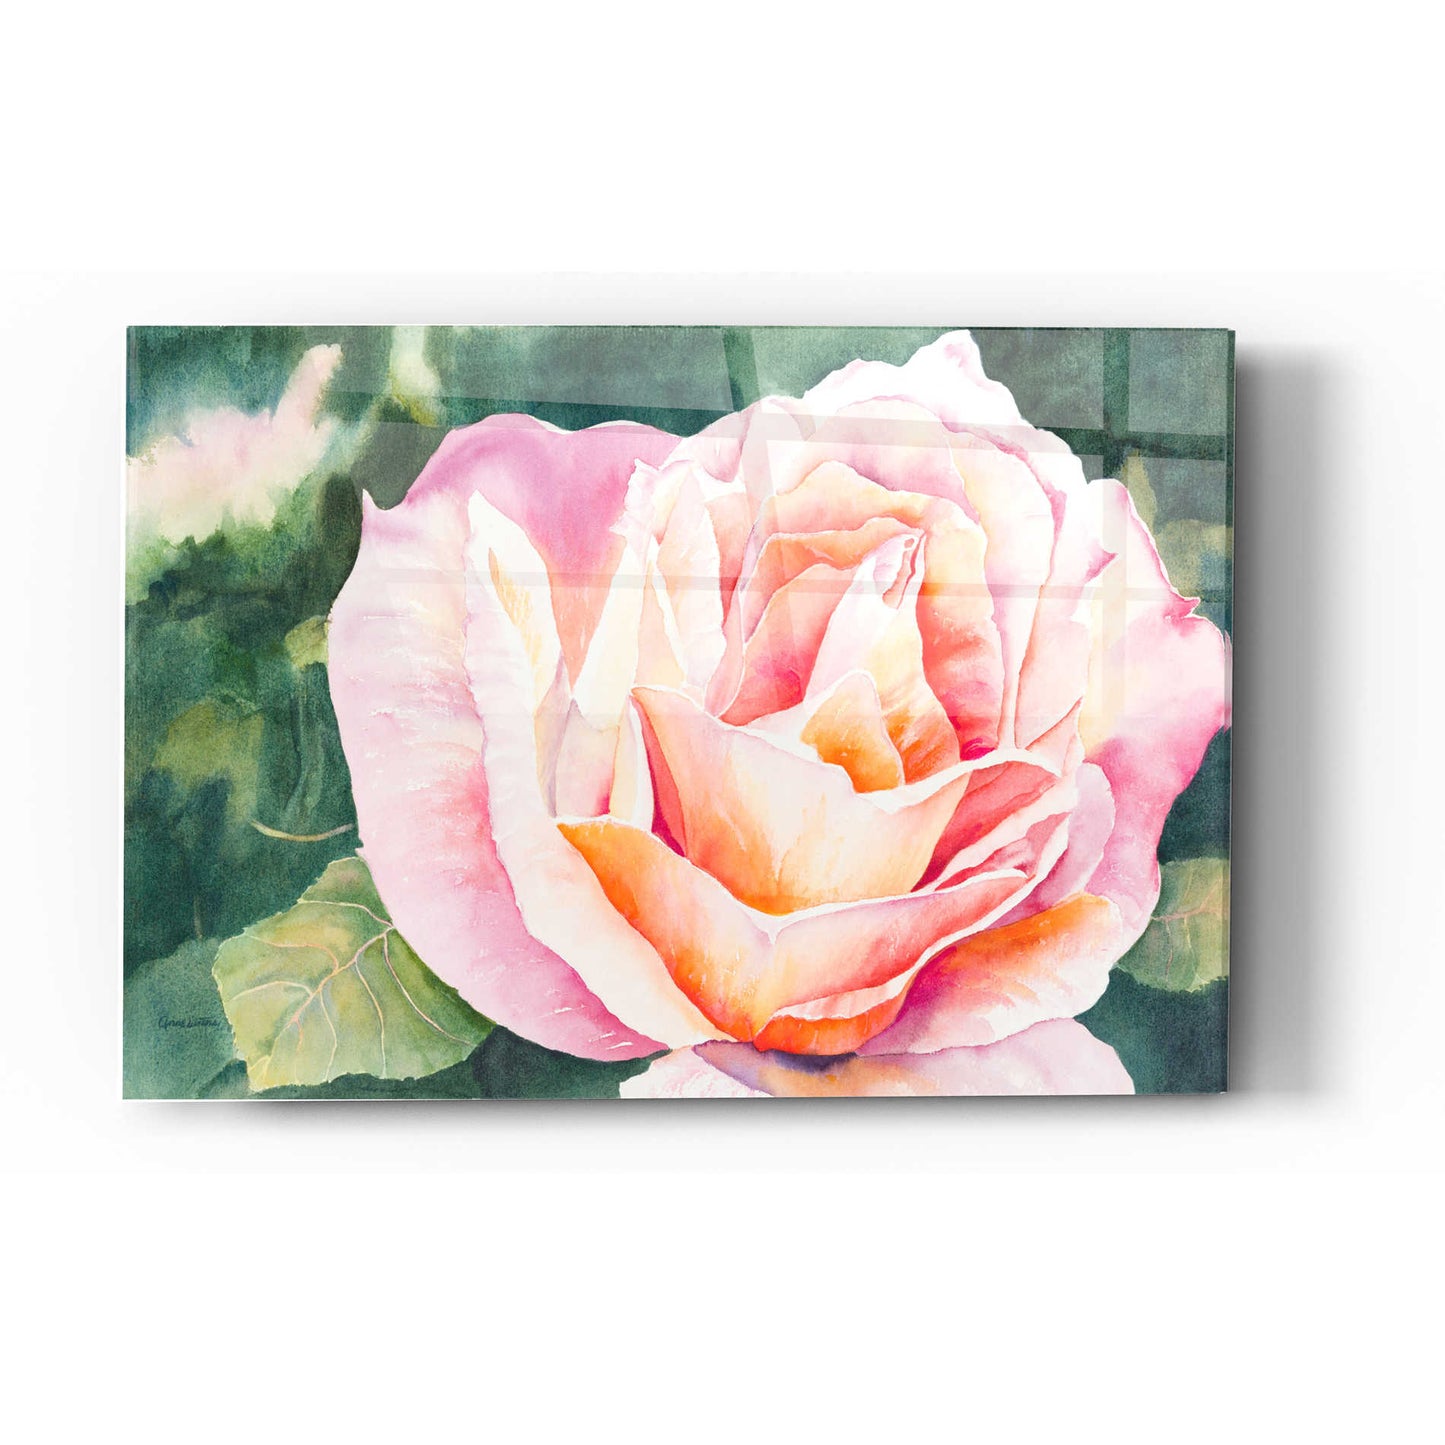 Epic Art 'Sunlit Rose' by Anne Waters, Acrylic Glass Wall Art,12x16